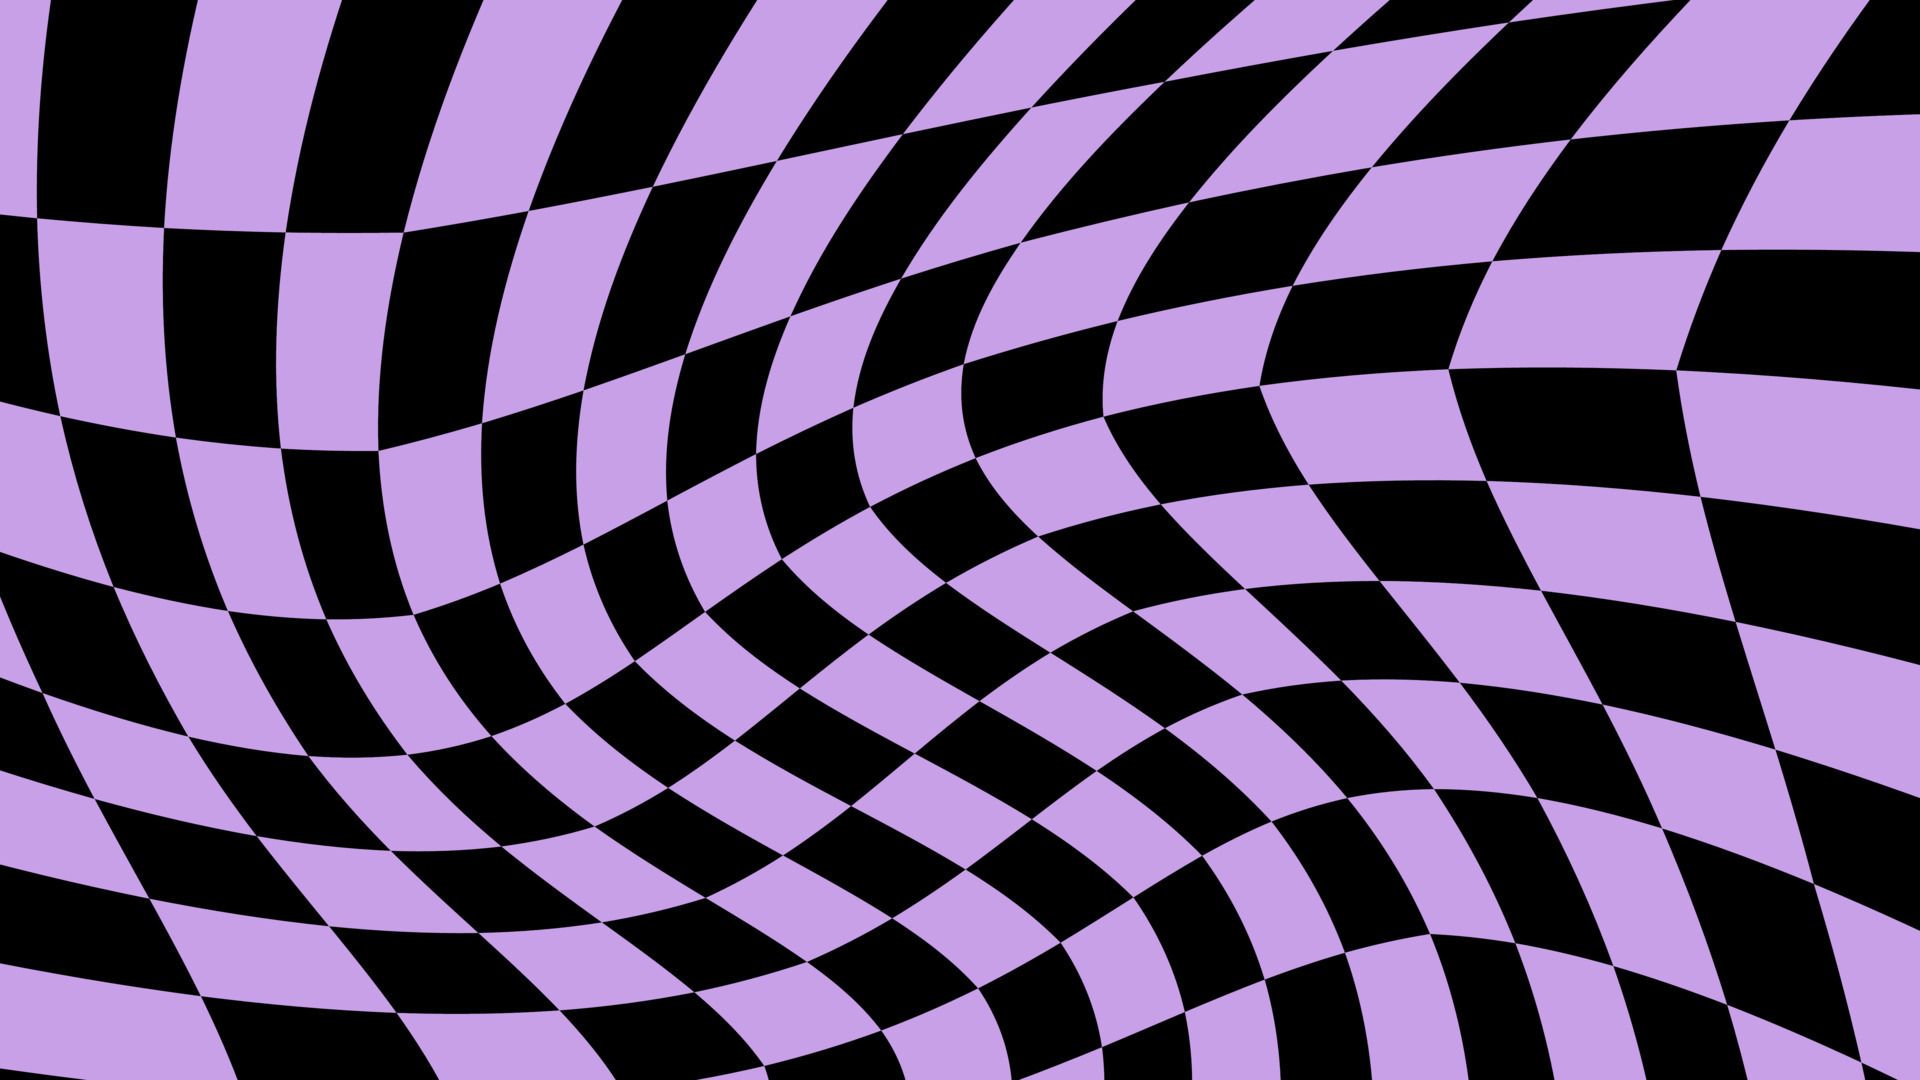 A purple and black chessboard pattern with a twist. - Black